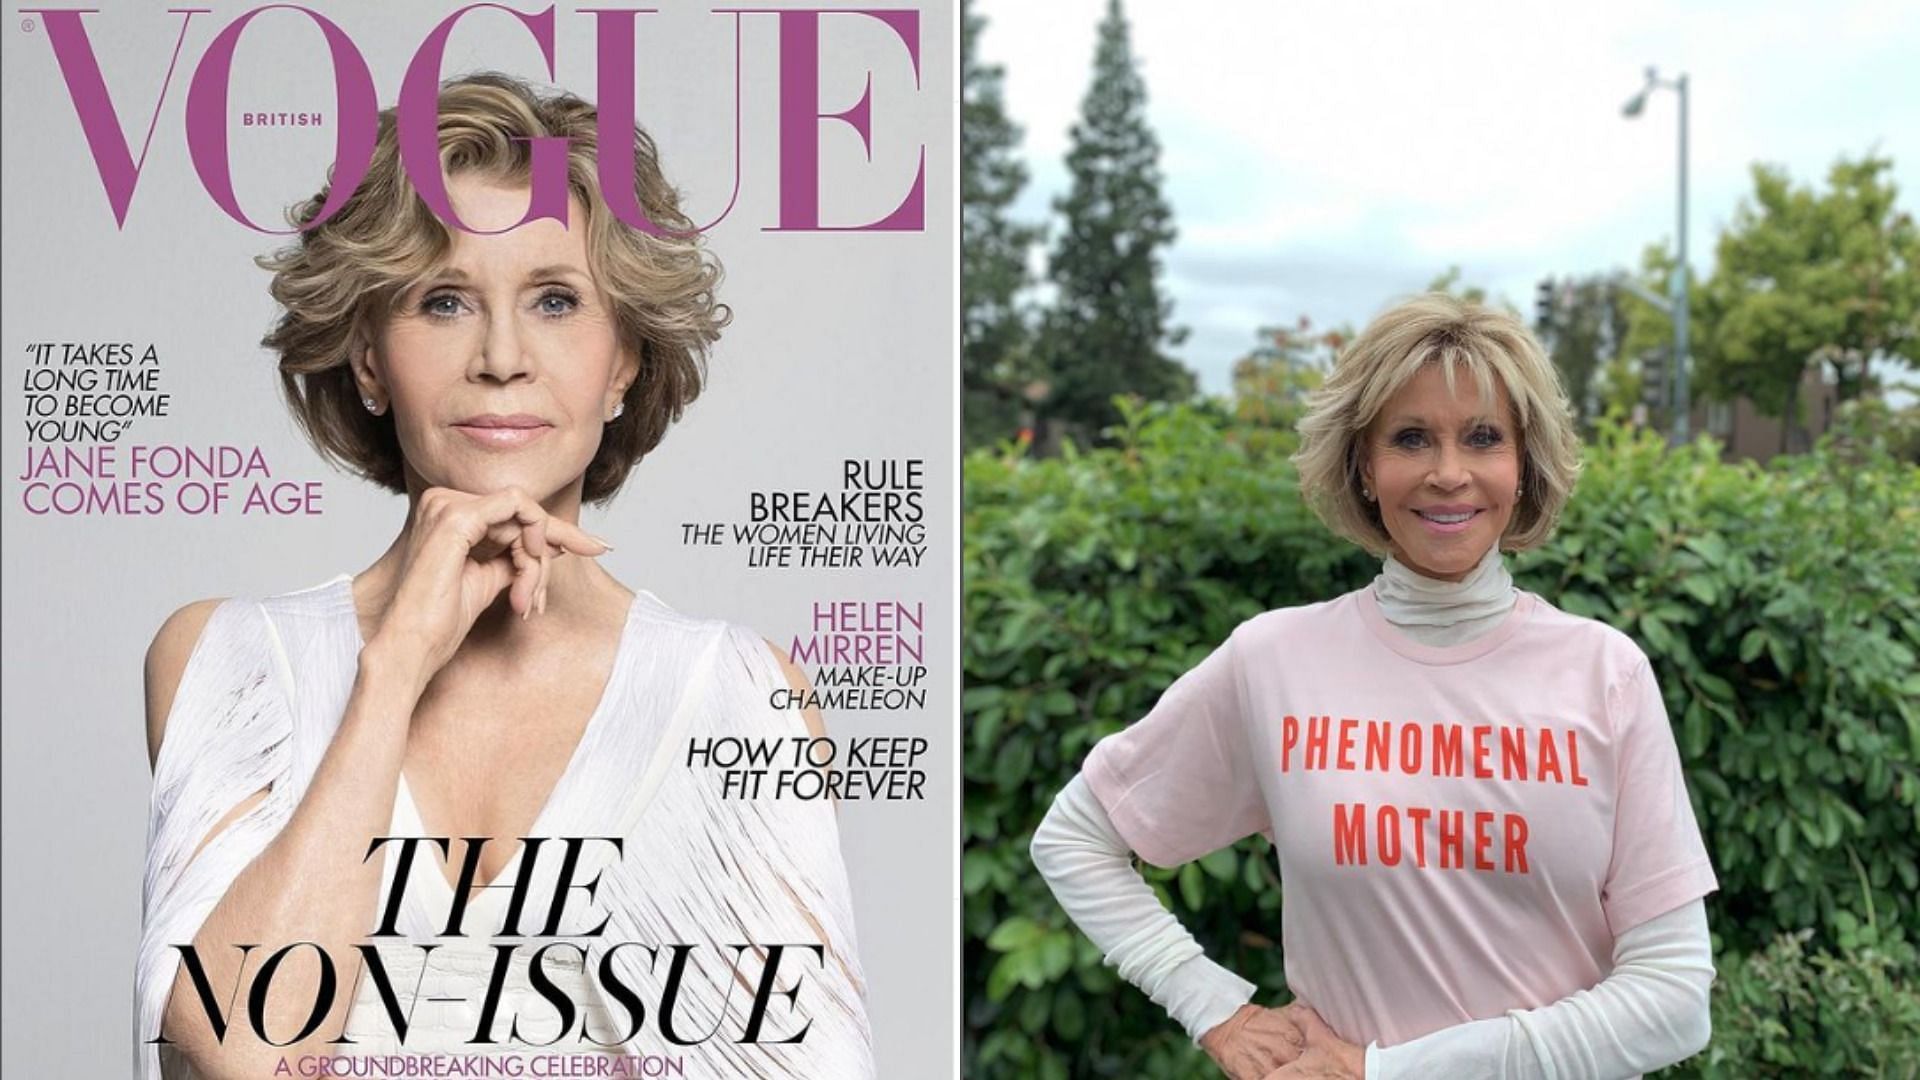 Jane Fonda keeps her exercise routine simple, which has helped her stay fit. (Image via IG @janefonda)